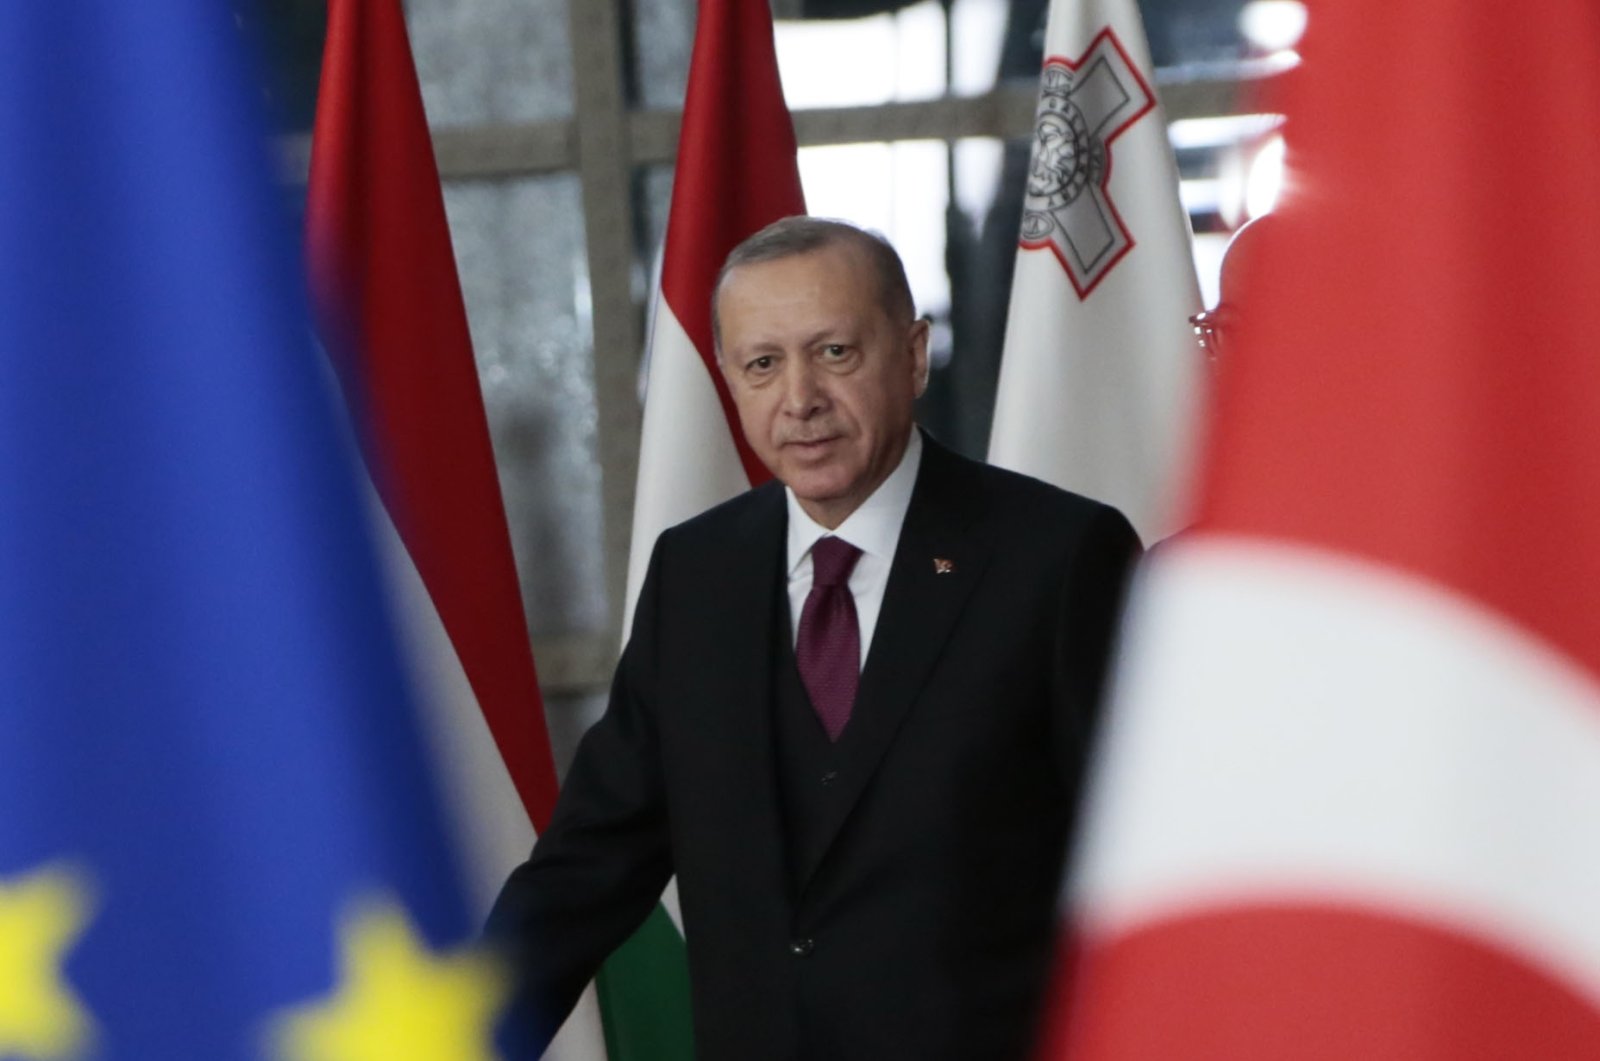 President Recep Tayyip Erdoğan arrives for a meeting with European Council President Charles Michel at the European Council building in Brussels, Belgium, March 9, 2020. (AP Photo)